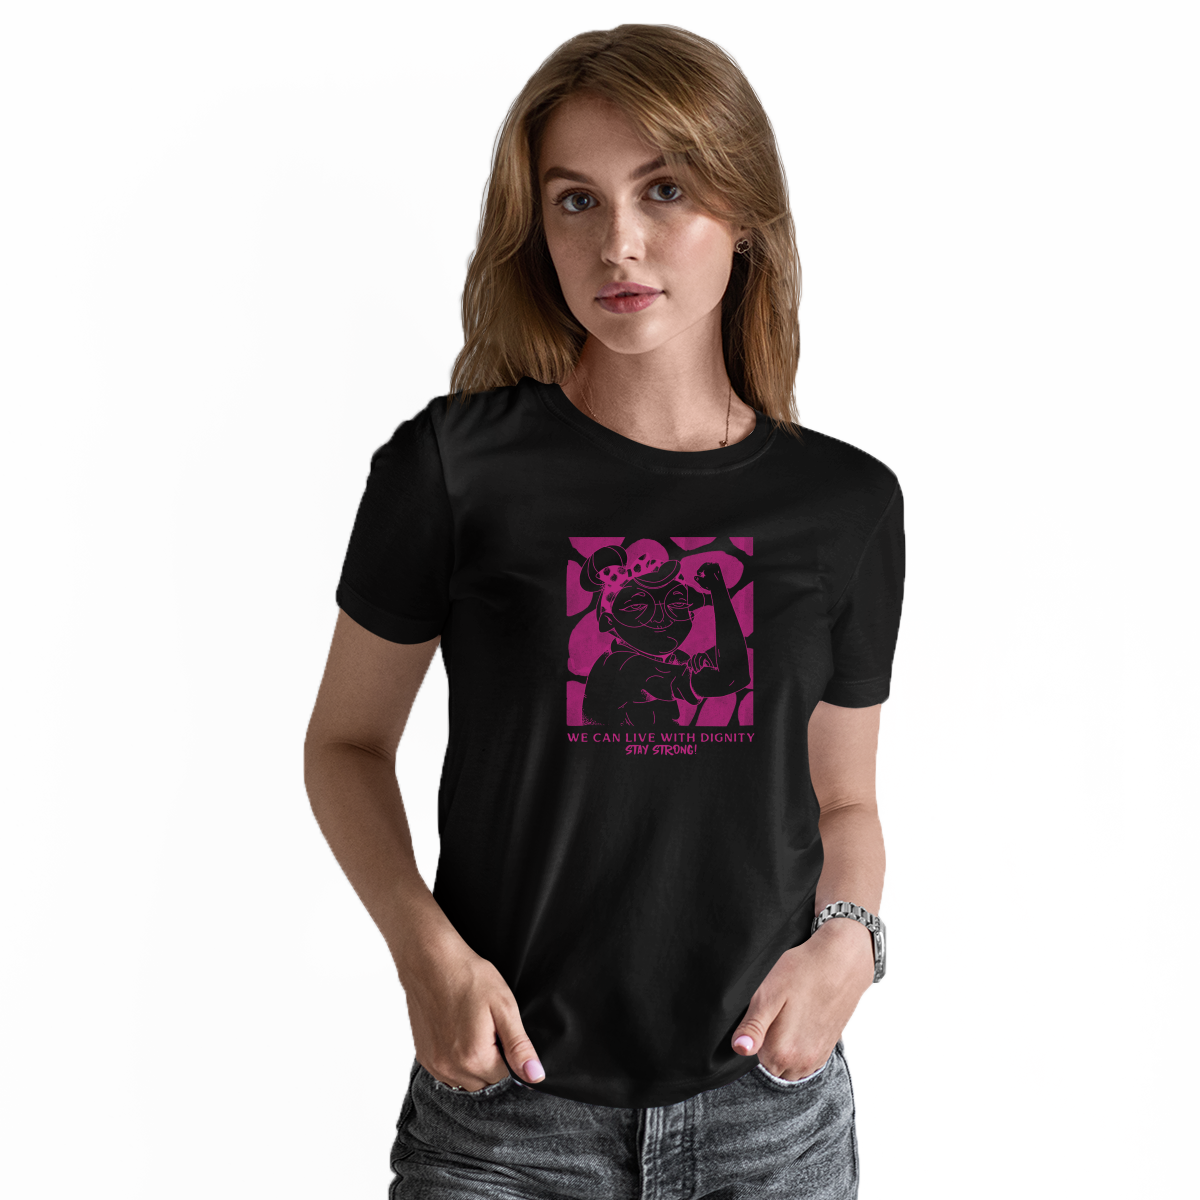 We can live with dignity STAY STRONG! Women's T-shirt | Black